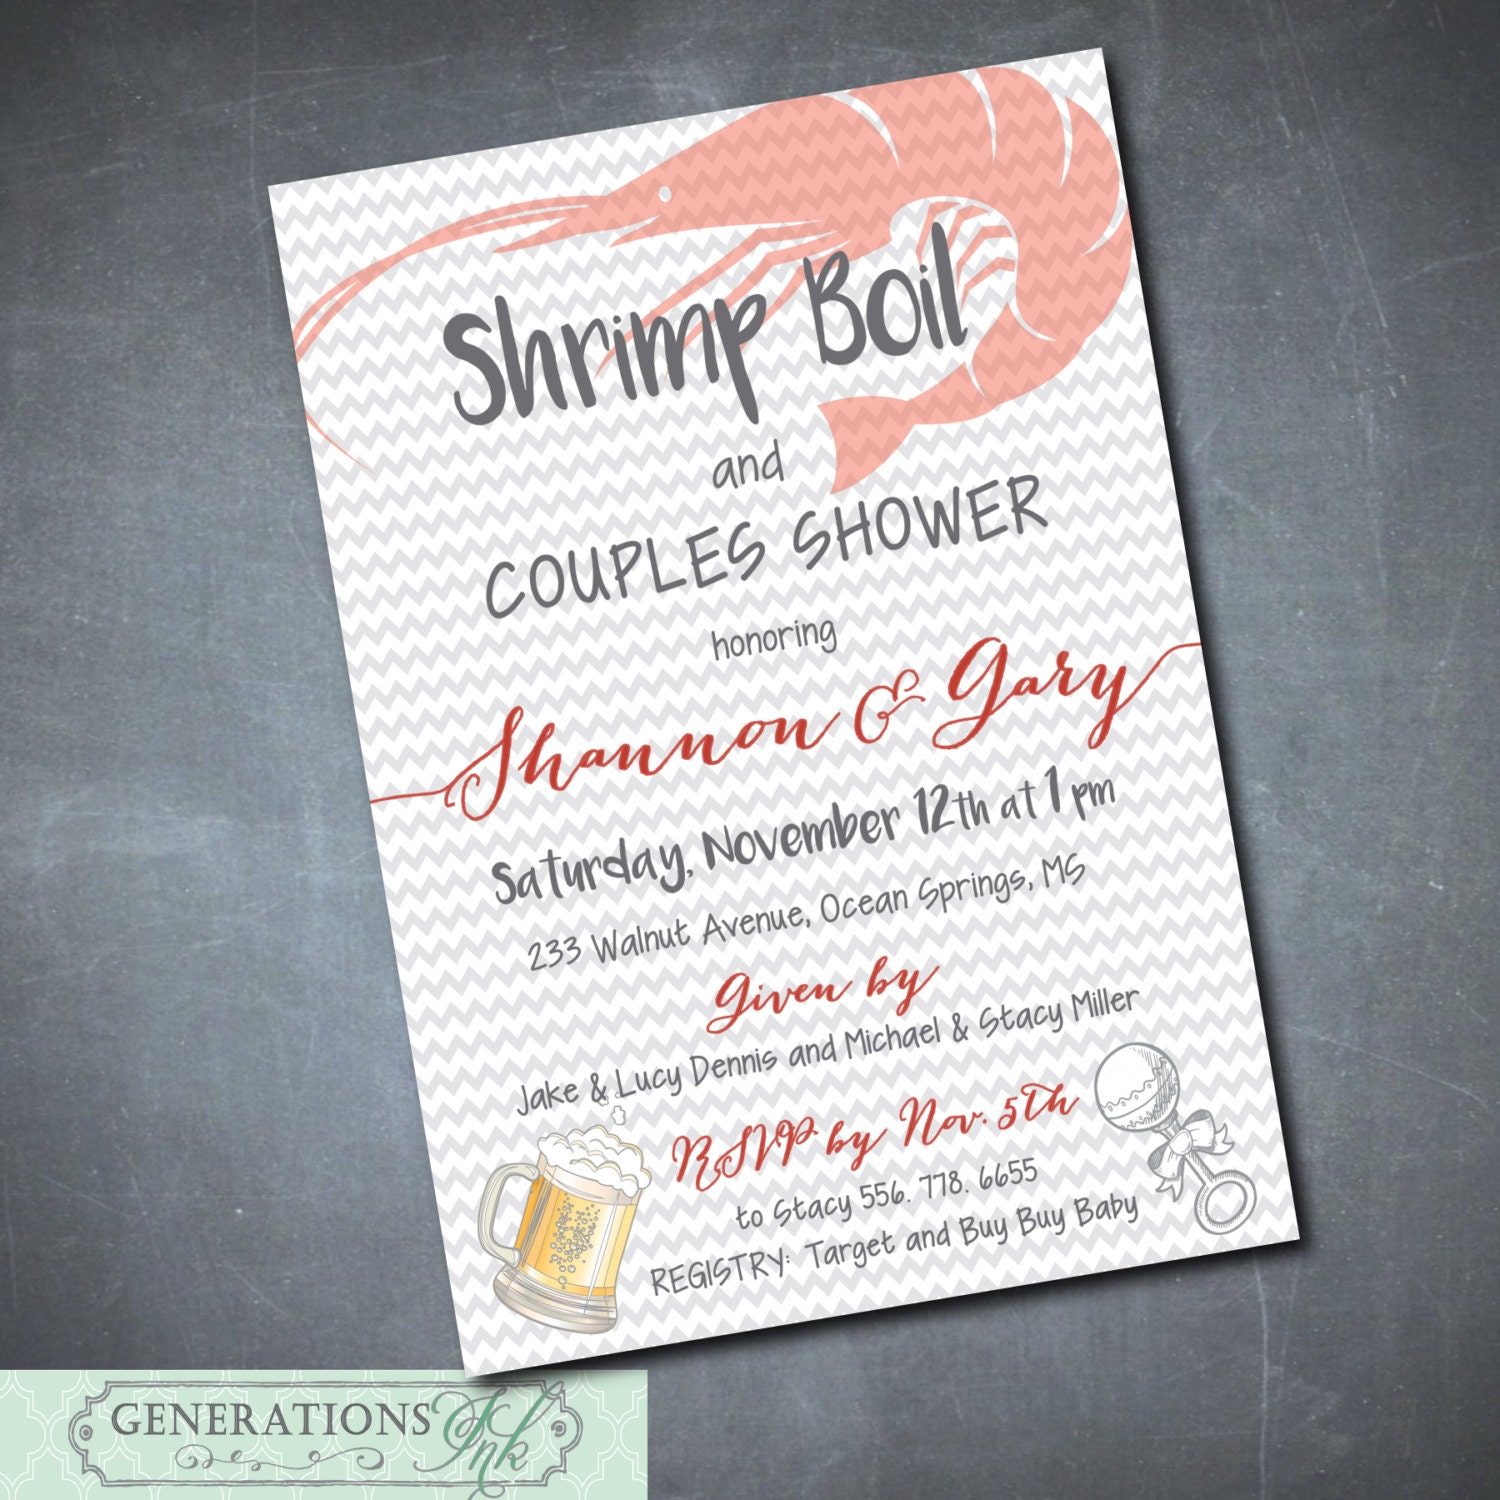 Couples Baby Shower Invitation, Seafood Boil, Shrimp Low Country Crawfish Co-Ed Shower/Wording Can Be Changed/Digital File